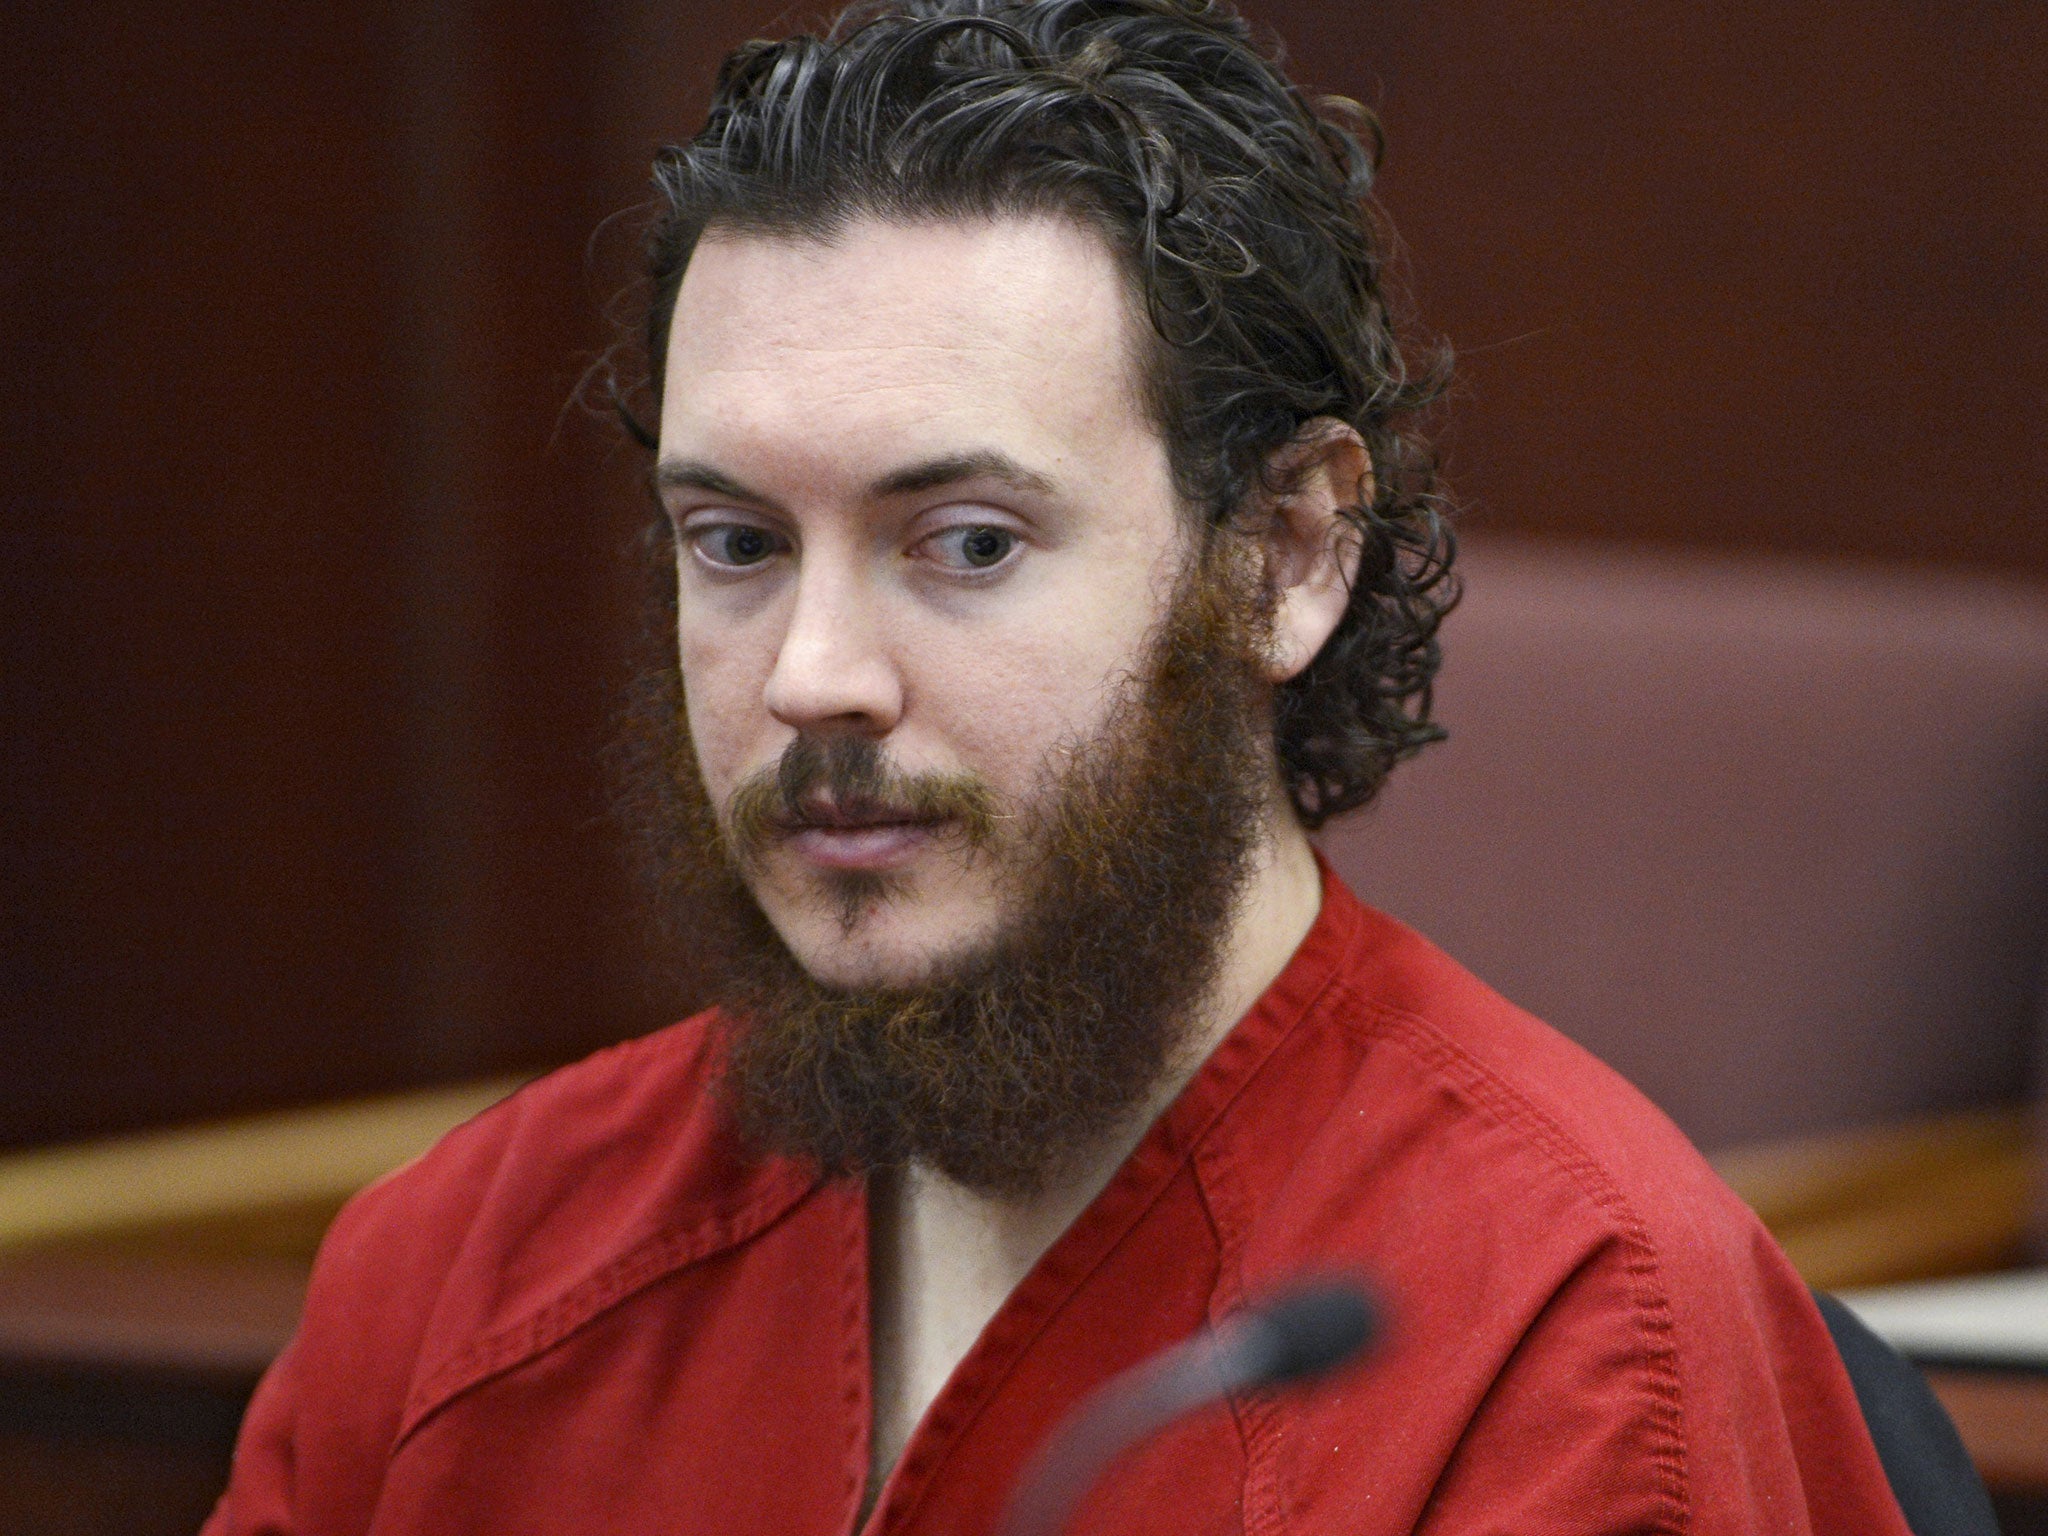 Lawyers for the Colorado movie theatre shooter James Holmes had argued against the death penalty